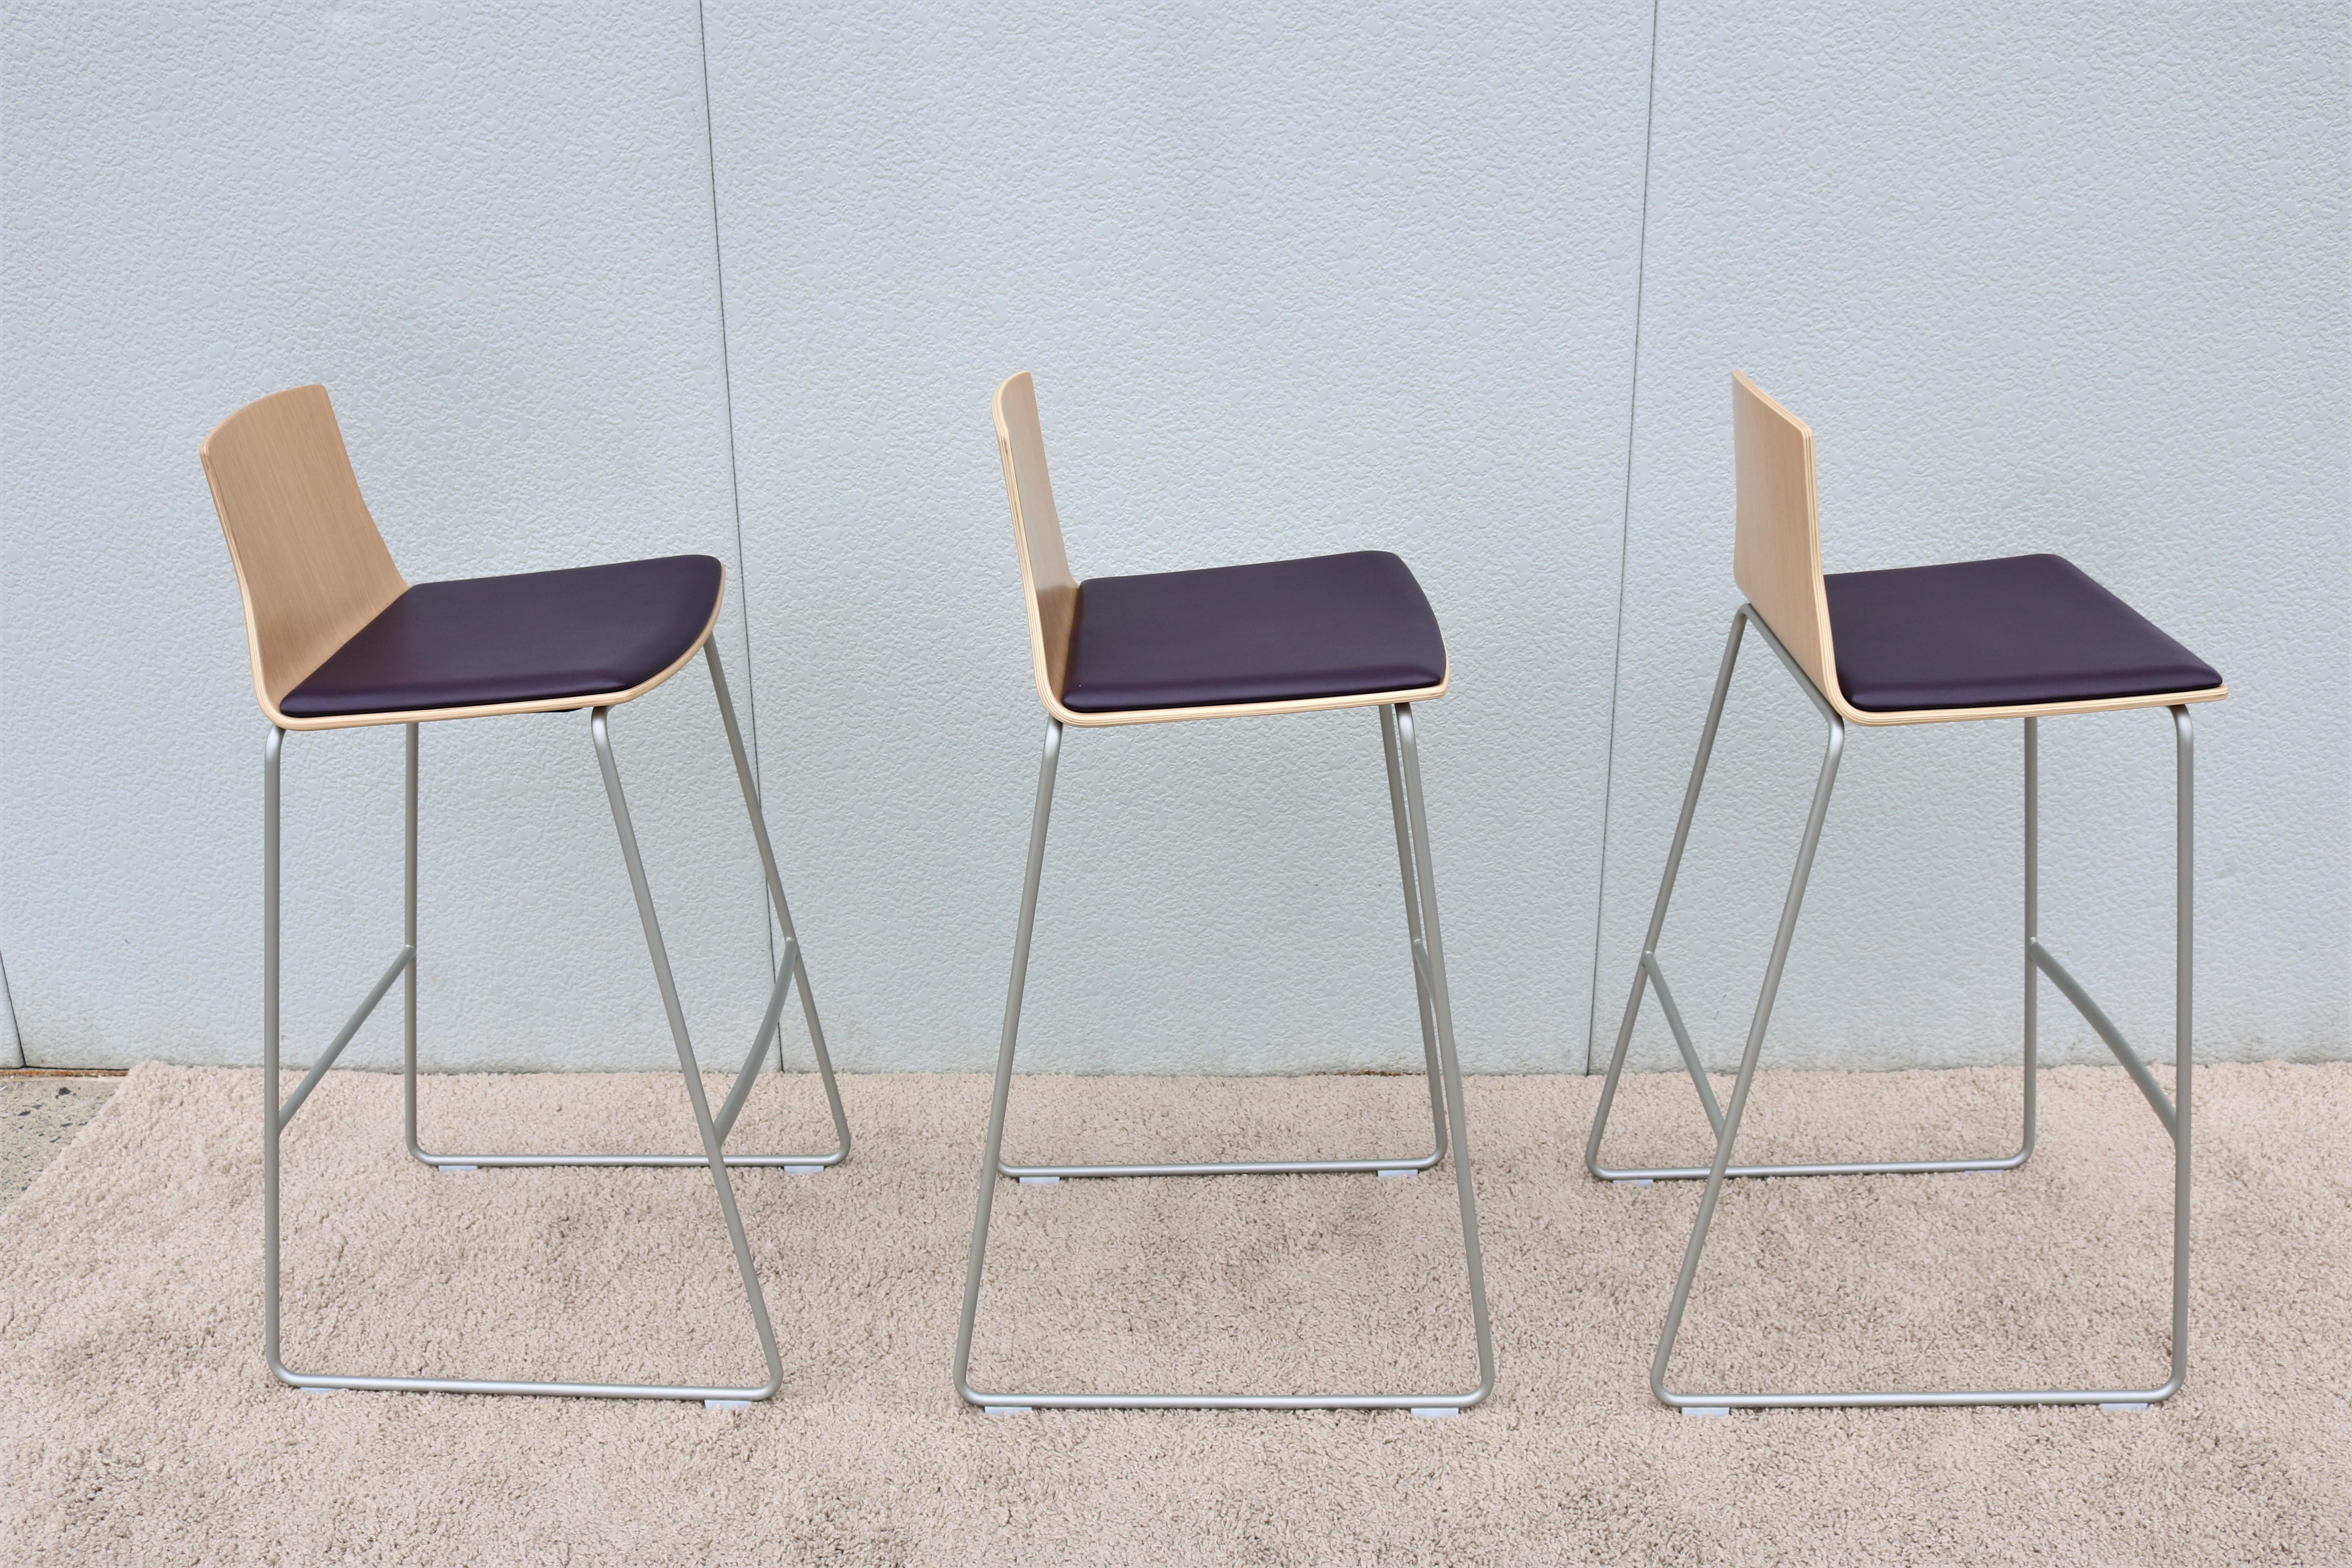 Powder-Coated Modern Lievore Altherr Molina for Coalesse Montara650 Bar Stools, New Set of 3 For Sale